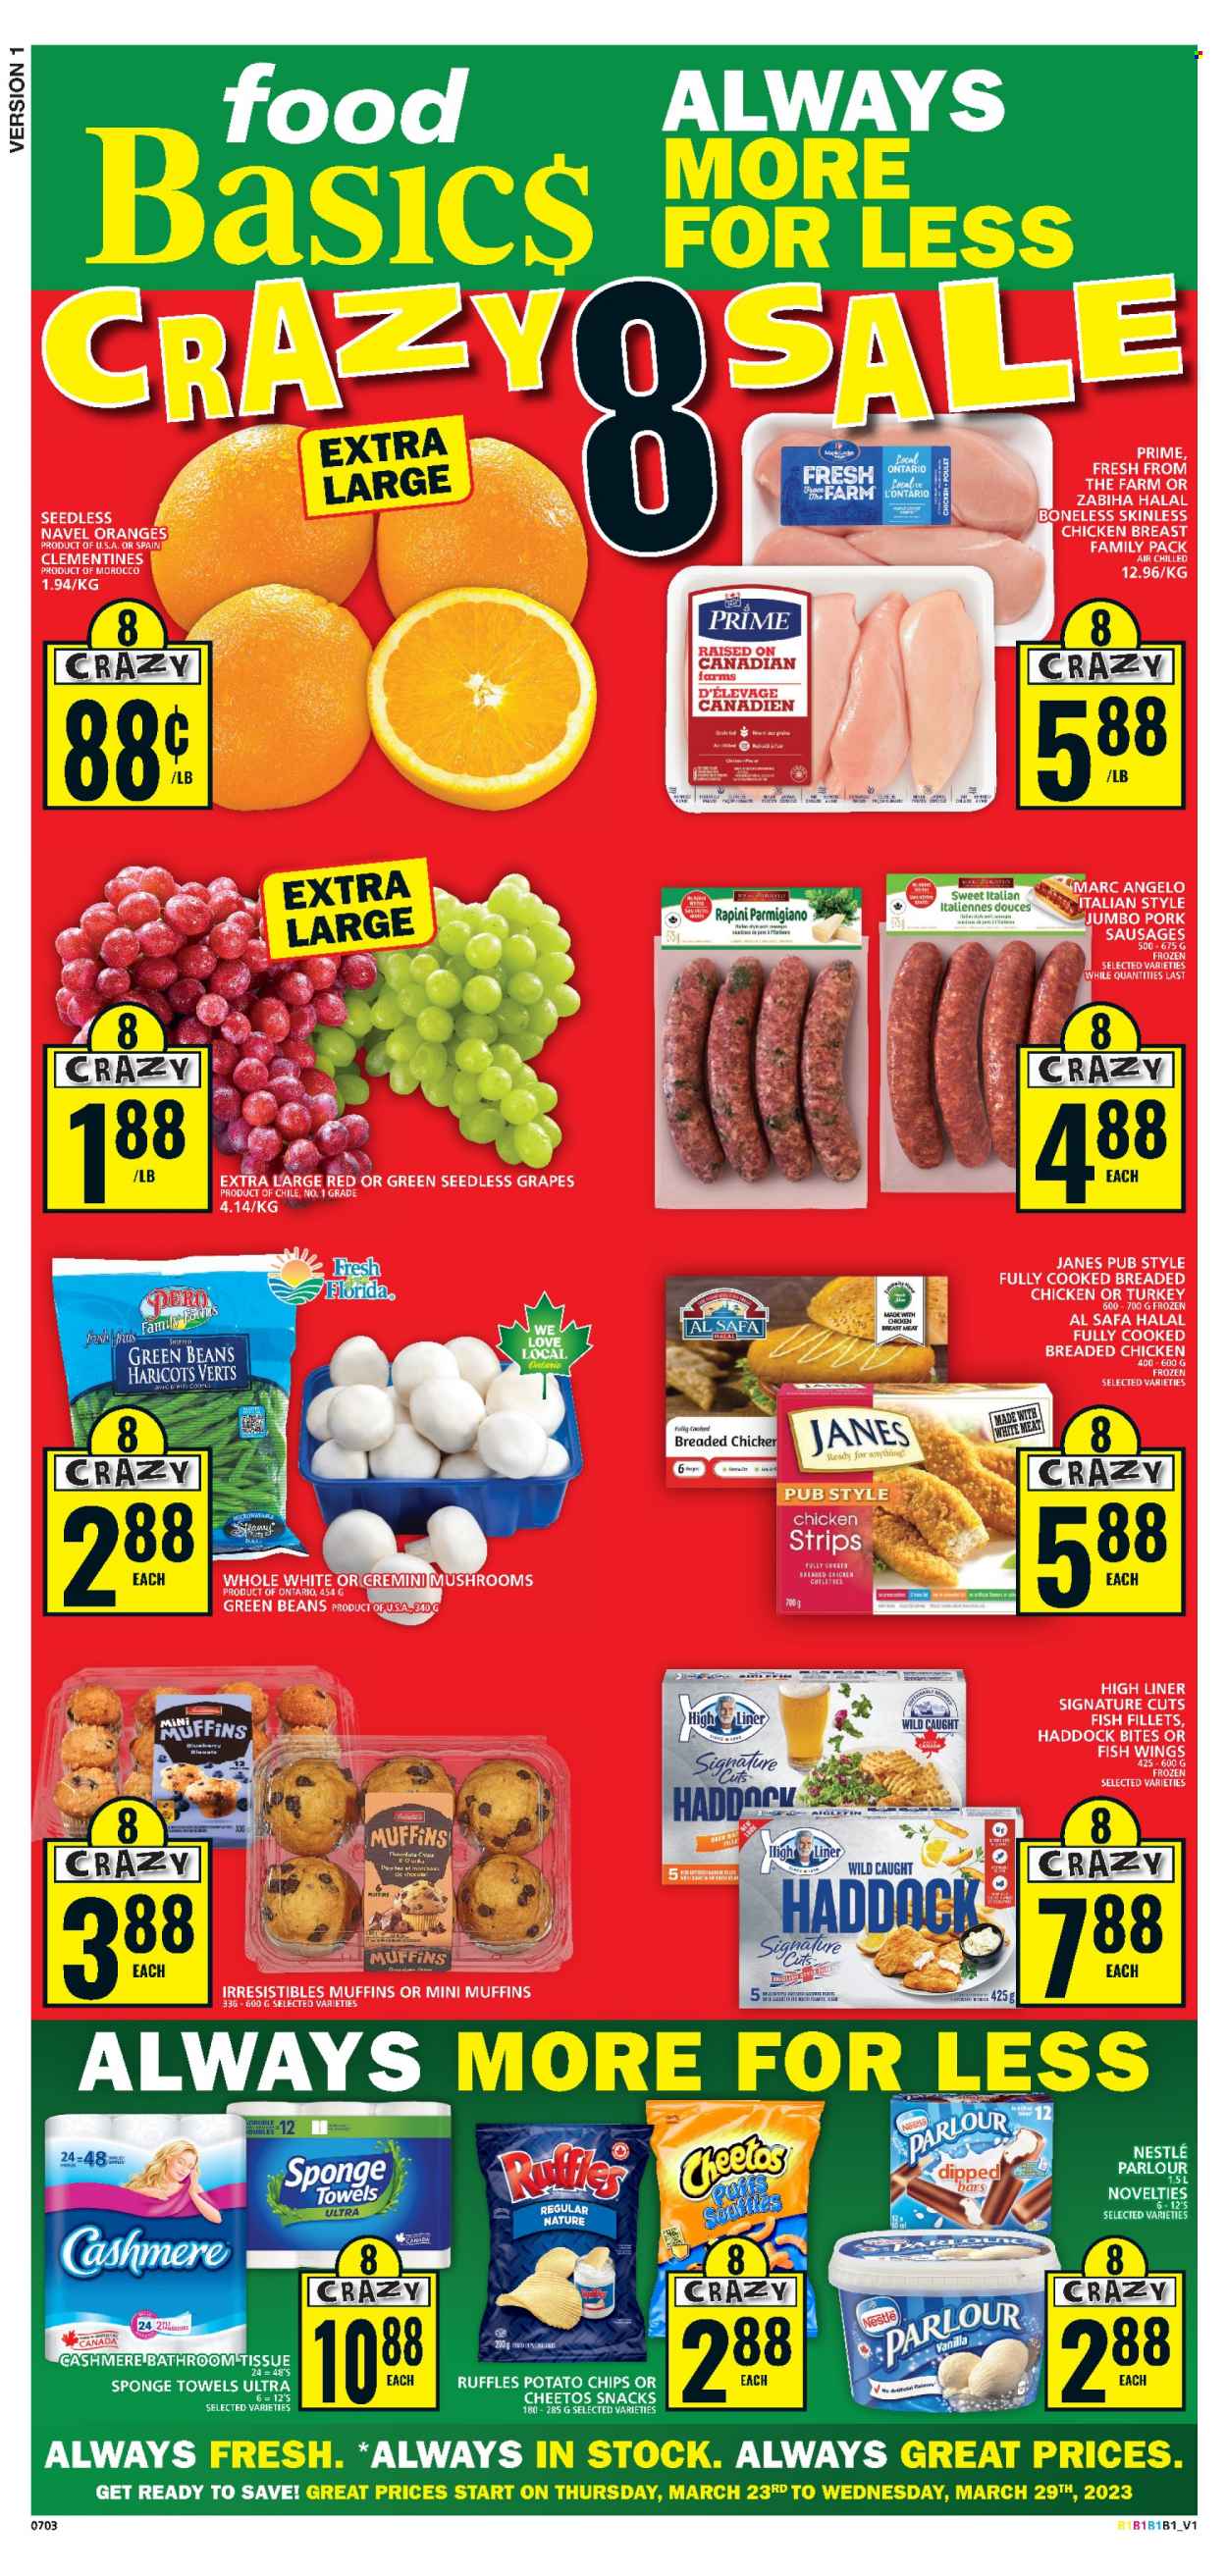 thumbnail - Food Basics Flyer - March 23, 2023 - March 29, 2023 - Sales products - mushrooms, muffin, beans, green beans, clementines, grapes, seedless grapes, oranges, navel oranges, fish fillets, haddock, fried chicken, sausage, Parmigiano Reggiano, strips, chicken strips, snack, potato chips, Cheetos, Ruffles, chicken breasts, chicken, turkey, bath tissue, sponge, towel, Nestlé. Page 1.